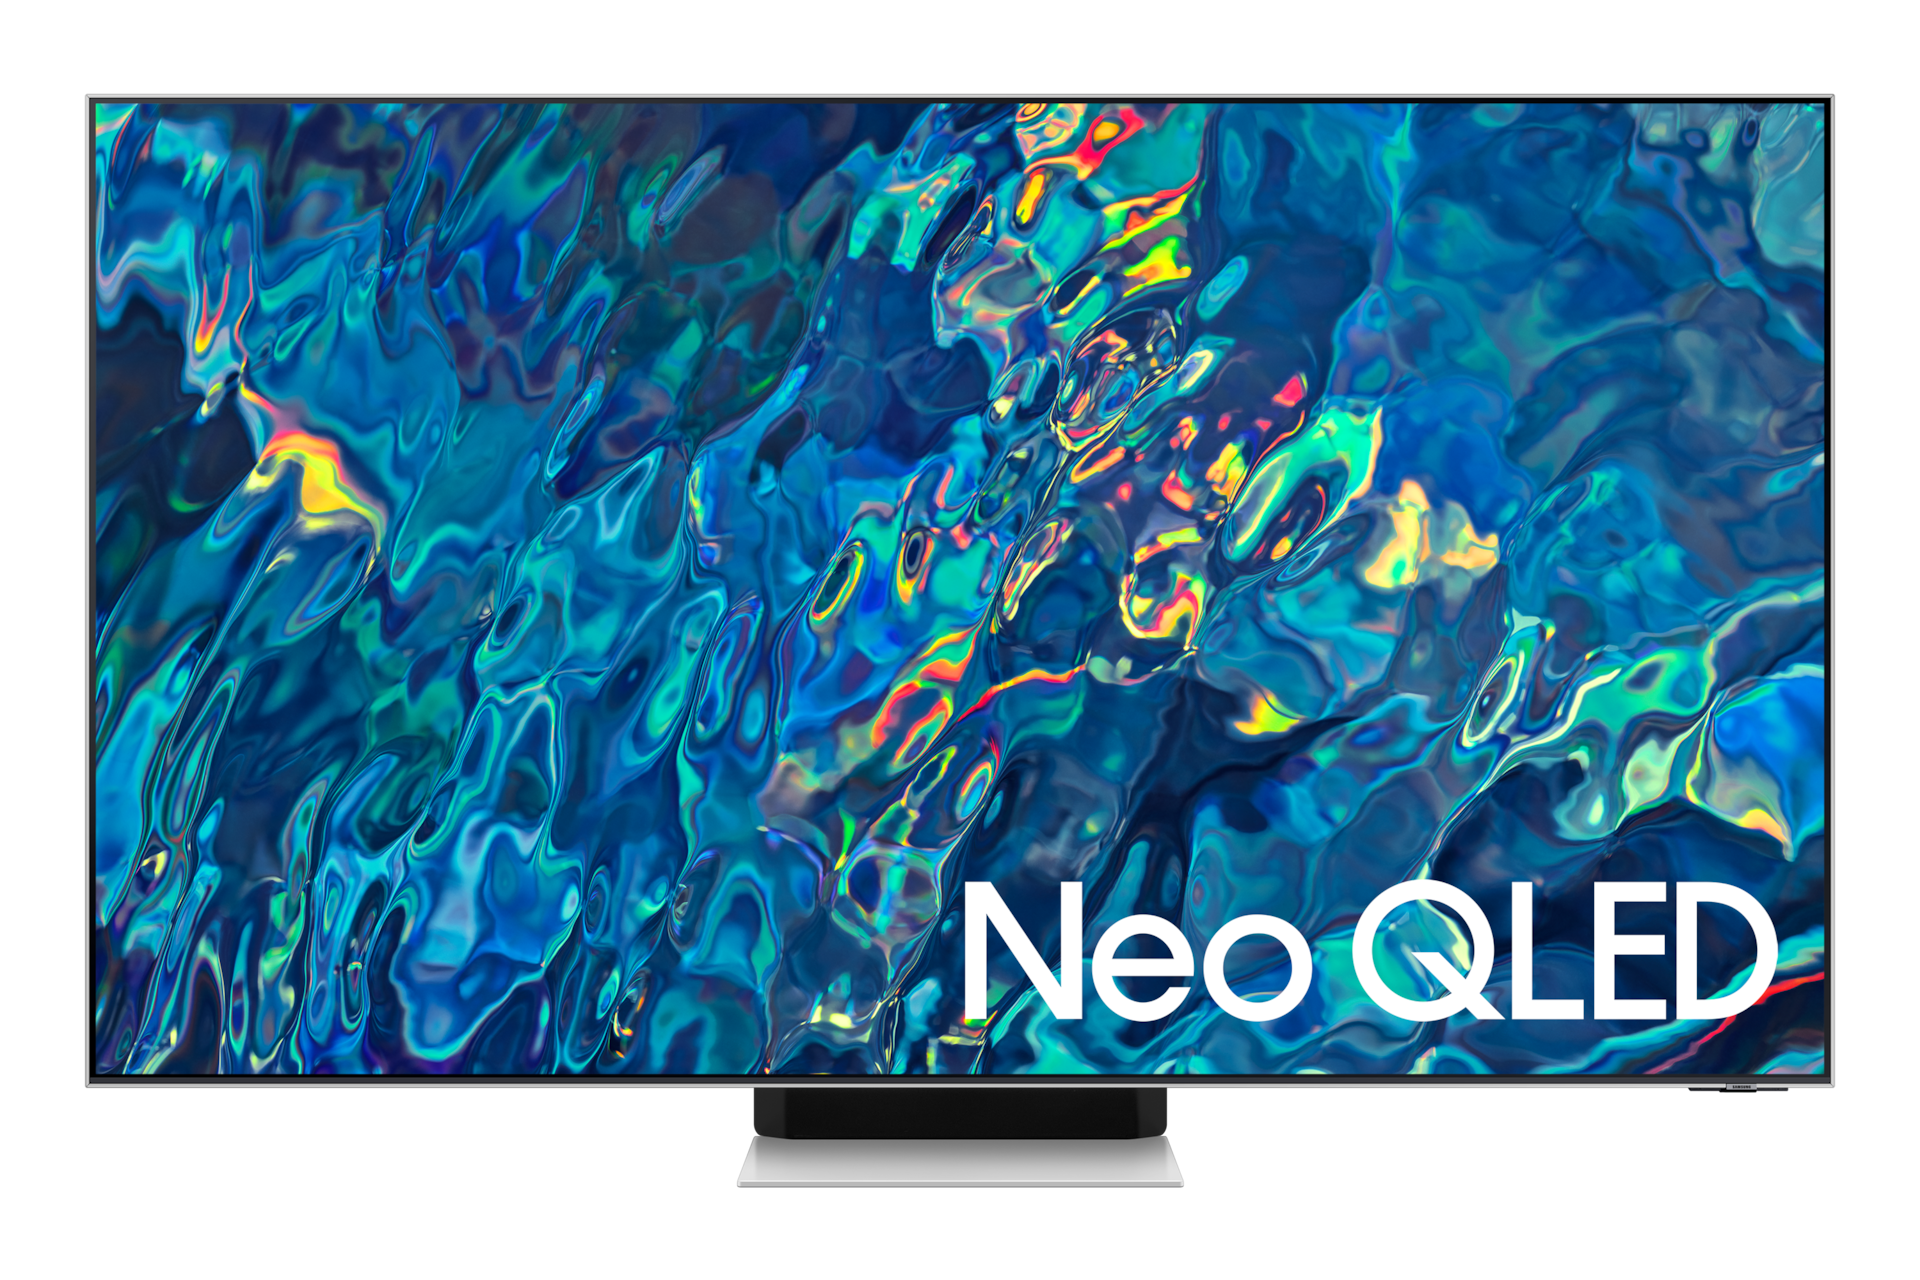 Buy Samsung QN95B Neo QLED 8k TV 75 inch (QA75QN95BASXNZ) specs and features, Quantum Matrix Technology, Infinity One Design, Real 8K Resolution, smart hub and SmartThings